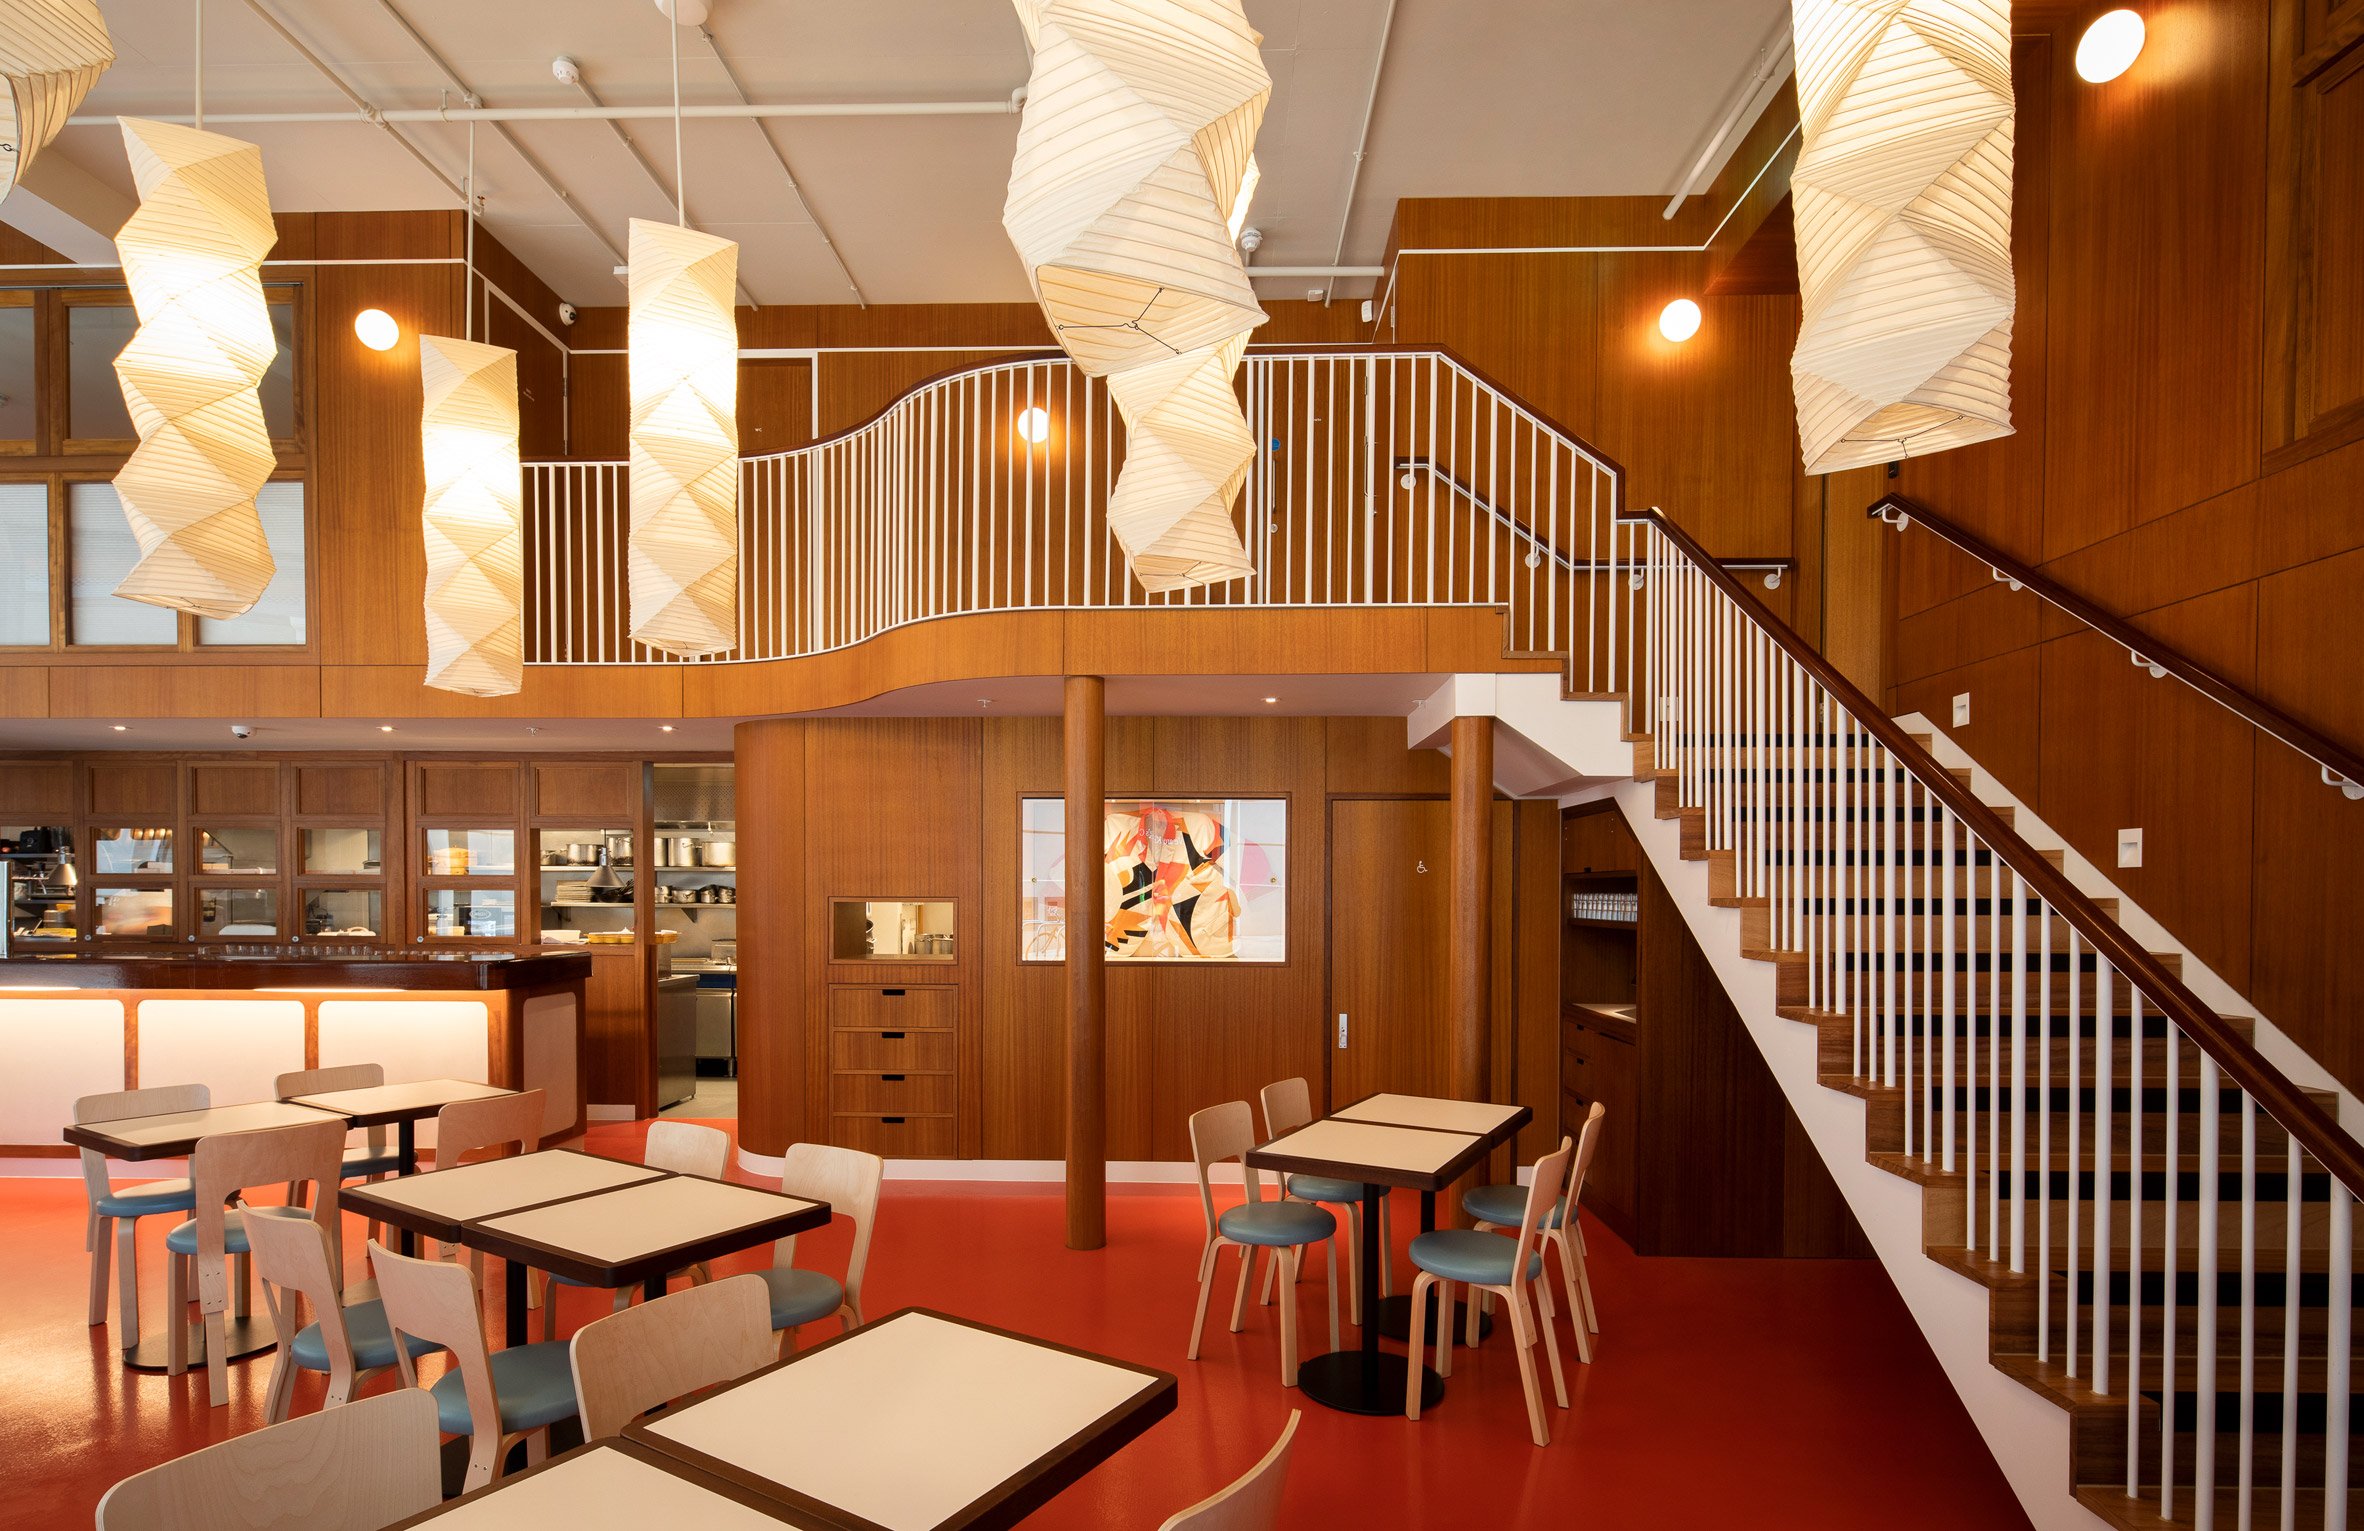 Interior of Cafe Bao with wood-panelled mezzanine